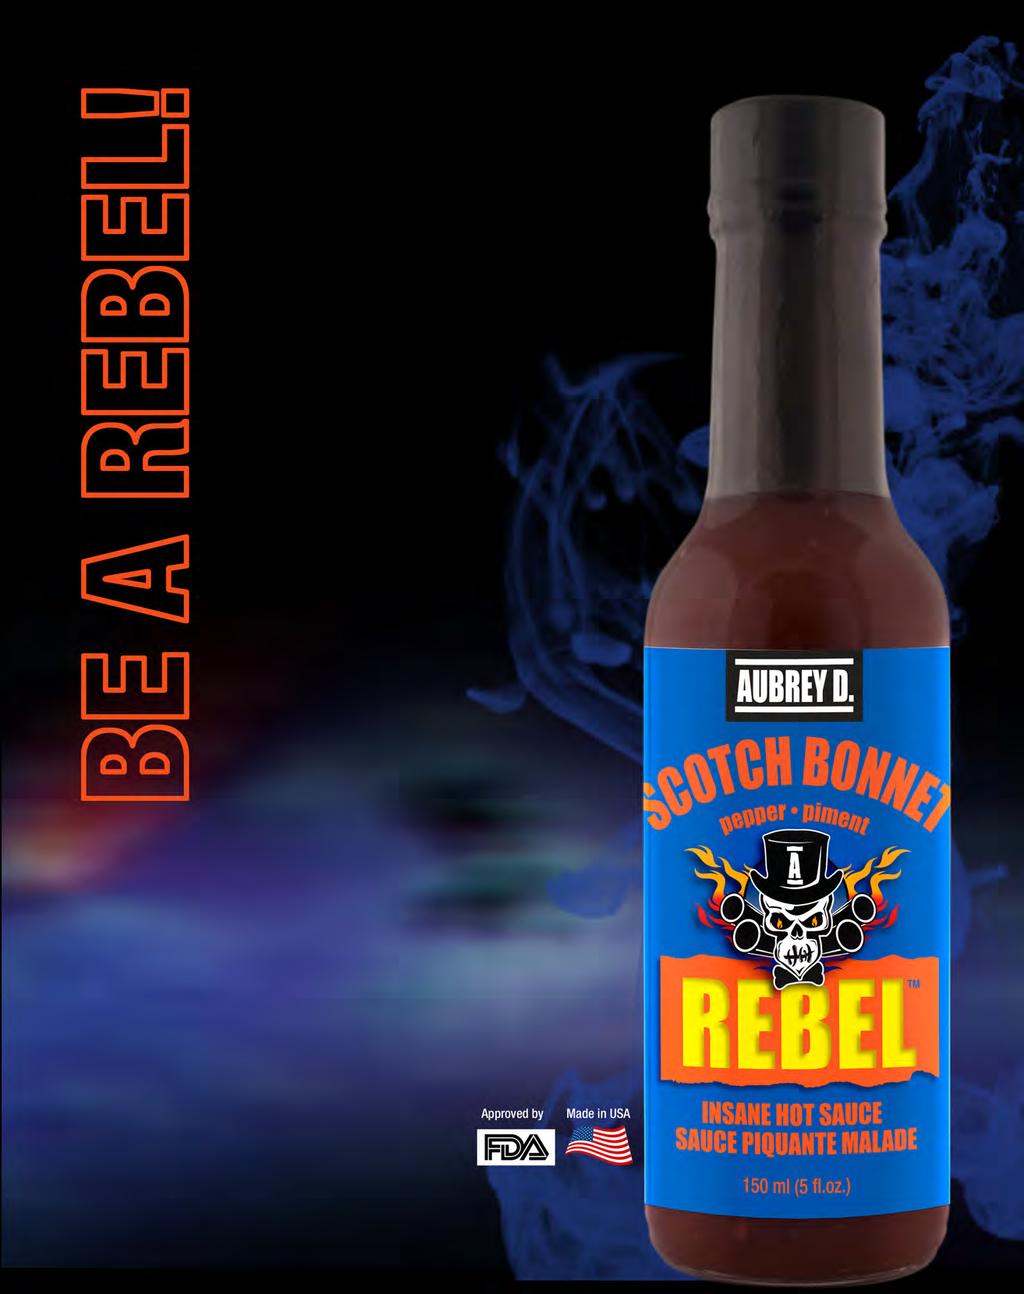 Ginger, blueberries, onions, carrots, apricot preserve, honey, garlic no this is not a shopping list, but the delicious ingredients we have packed in this jar of Aubrey D. Rebel Hot Sauce.